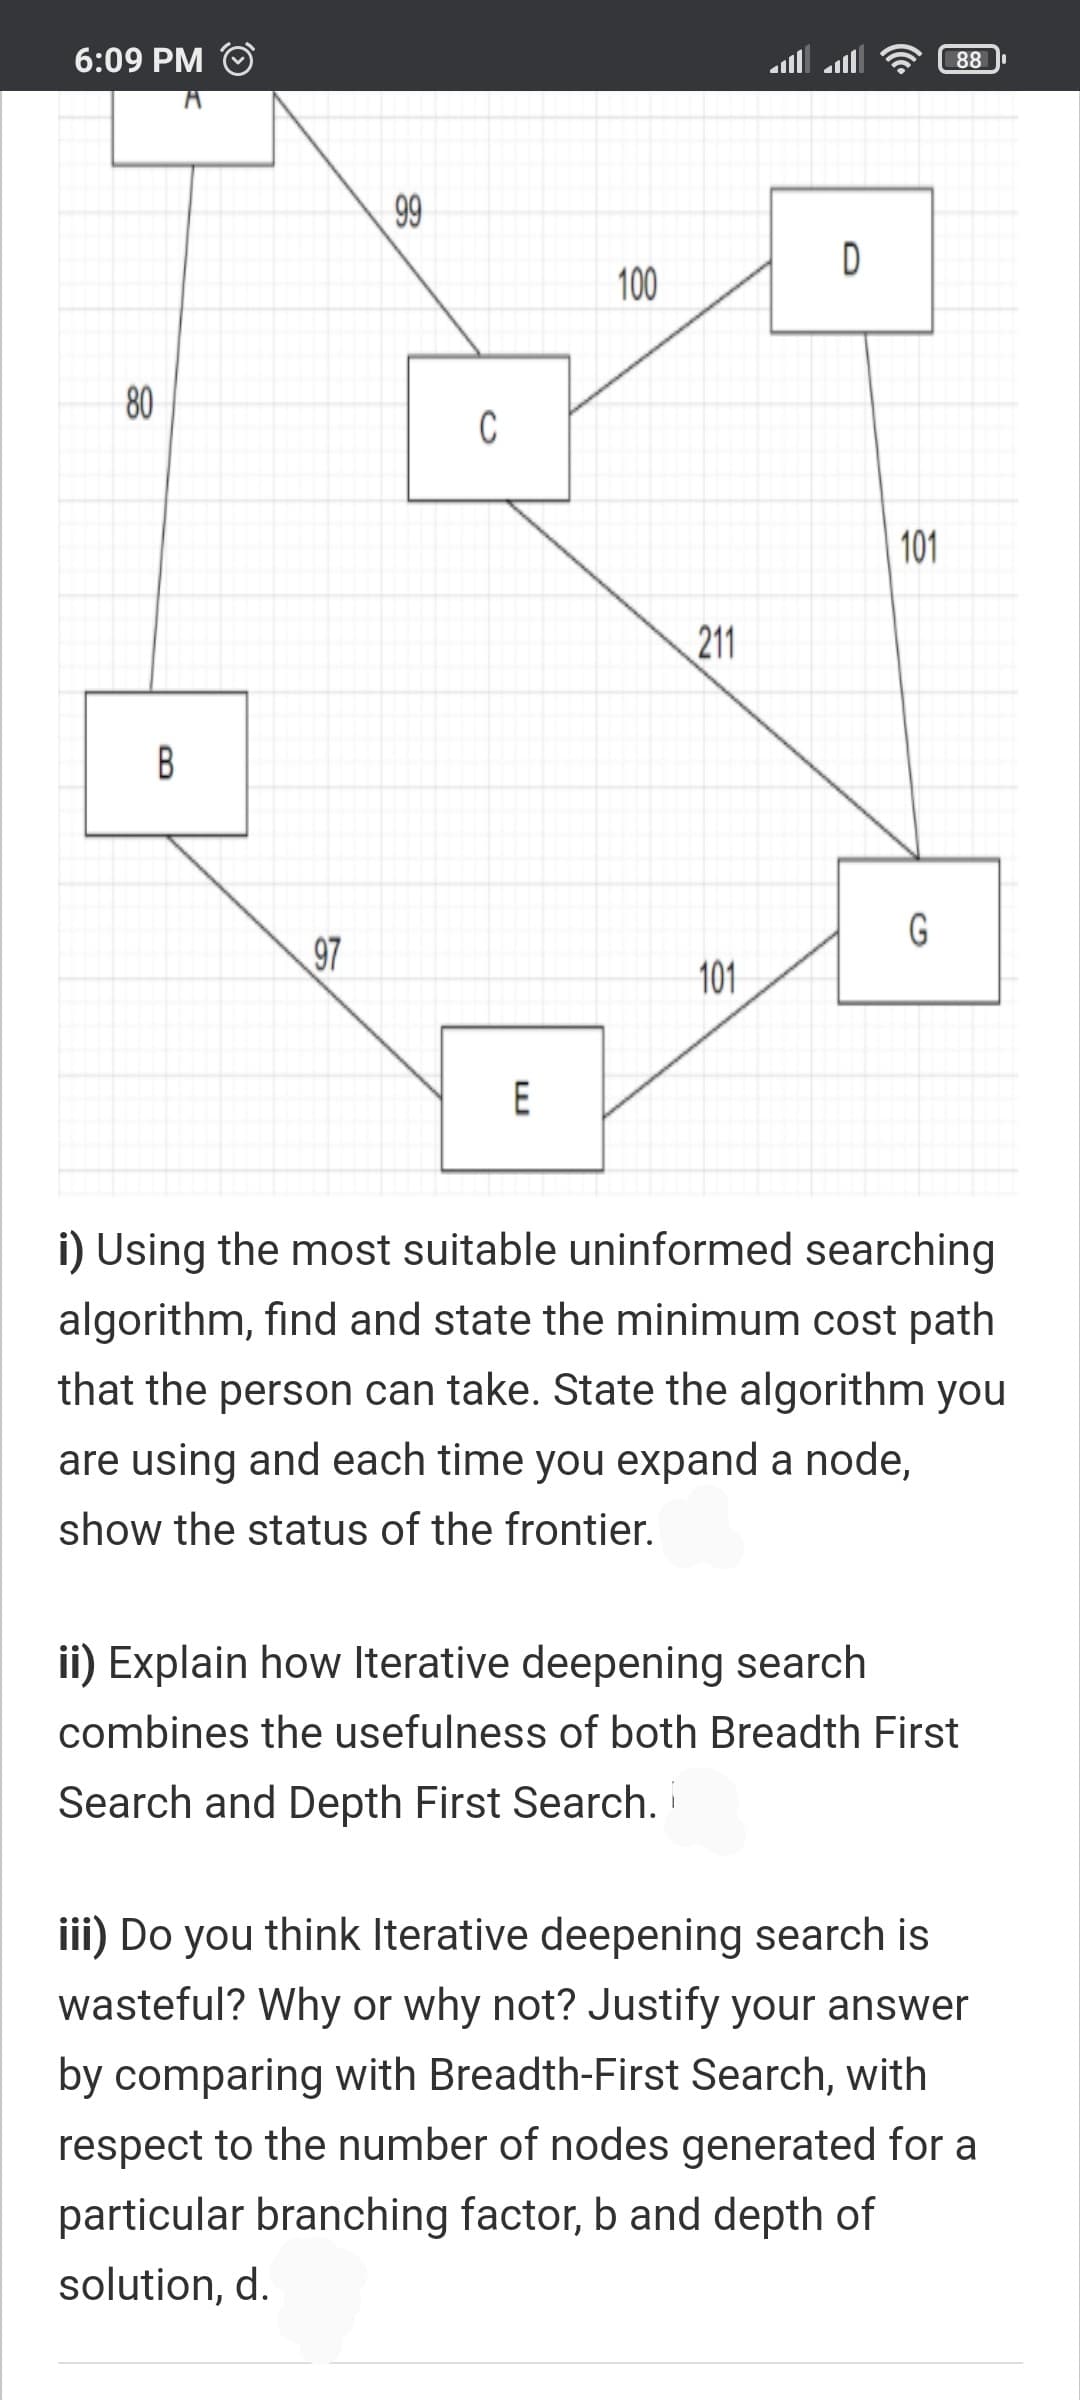 6:09 PM
88
99
D
100
80
C
101
211
B
G
97
101
E
i) Using the most suitable uninformed searching
algorithm, find and state the minimum cost path
that the person can take. State the algorithm you
are using and each time you expand a node,
show the status of the frontier.
ii) Explain how Iterative deepening search
combines the usefulness of both Breadth First
Search and Depth First Search.
iii) Do you think Iterative deepening search is
wasteful? Why or why not? Justify your answer
by comparing with Breadth-First Search, with
respect to the number of nodes generated for a
particular branching factor, b and depth of
solution, d.
